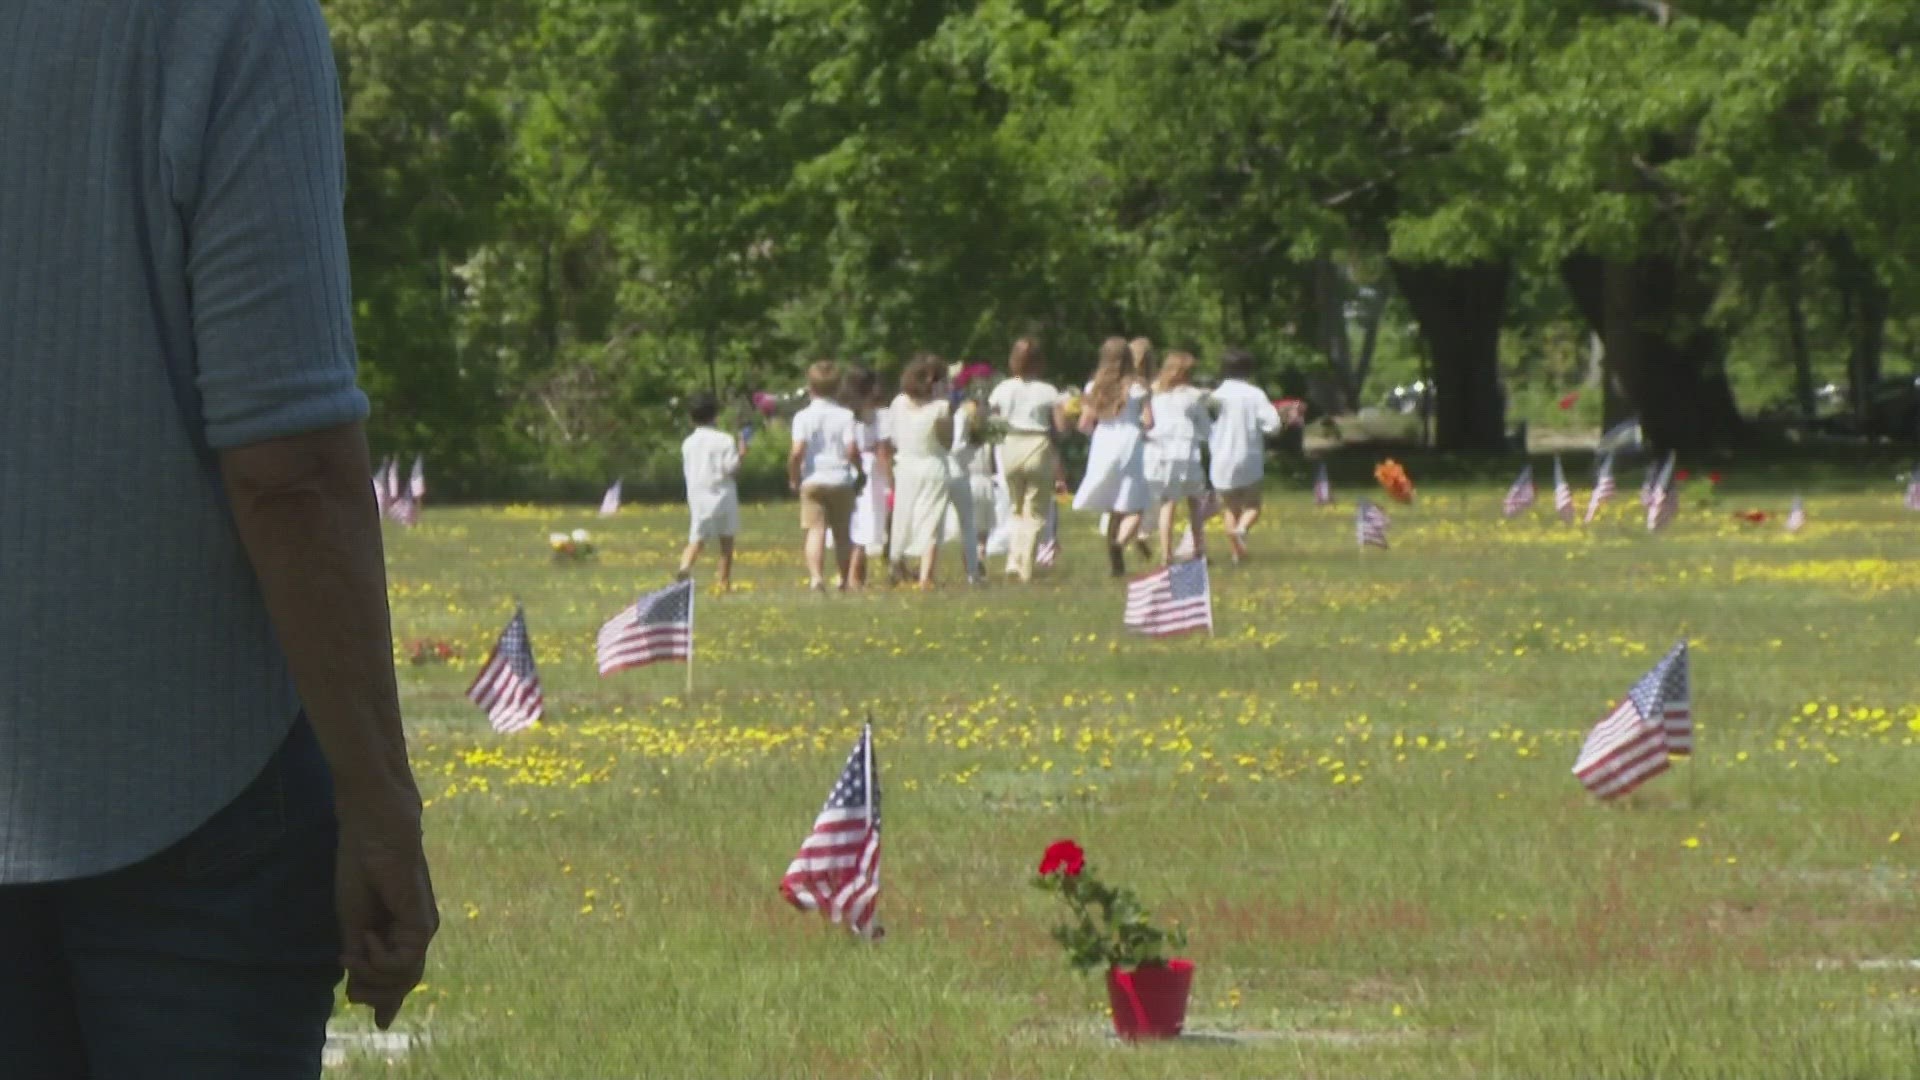 The Deering Center Neighborhood Association and the American Legion held a Memorial Day procession and commemorations in Portland.